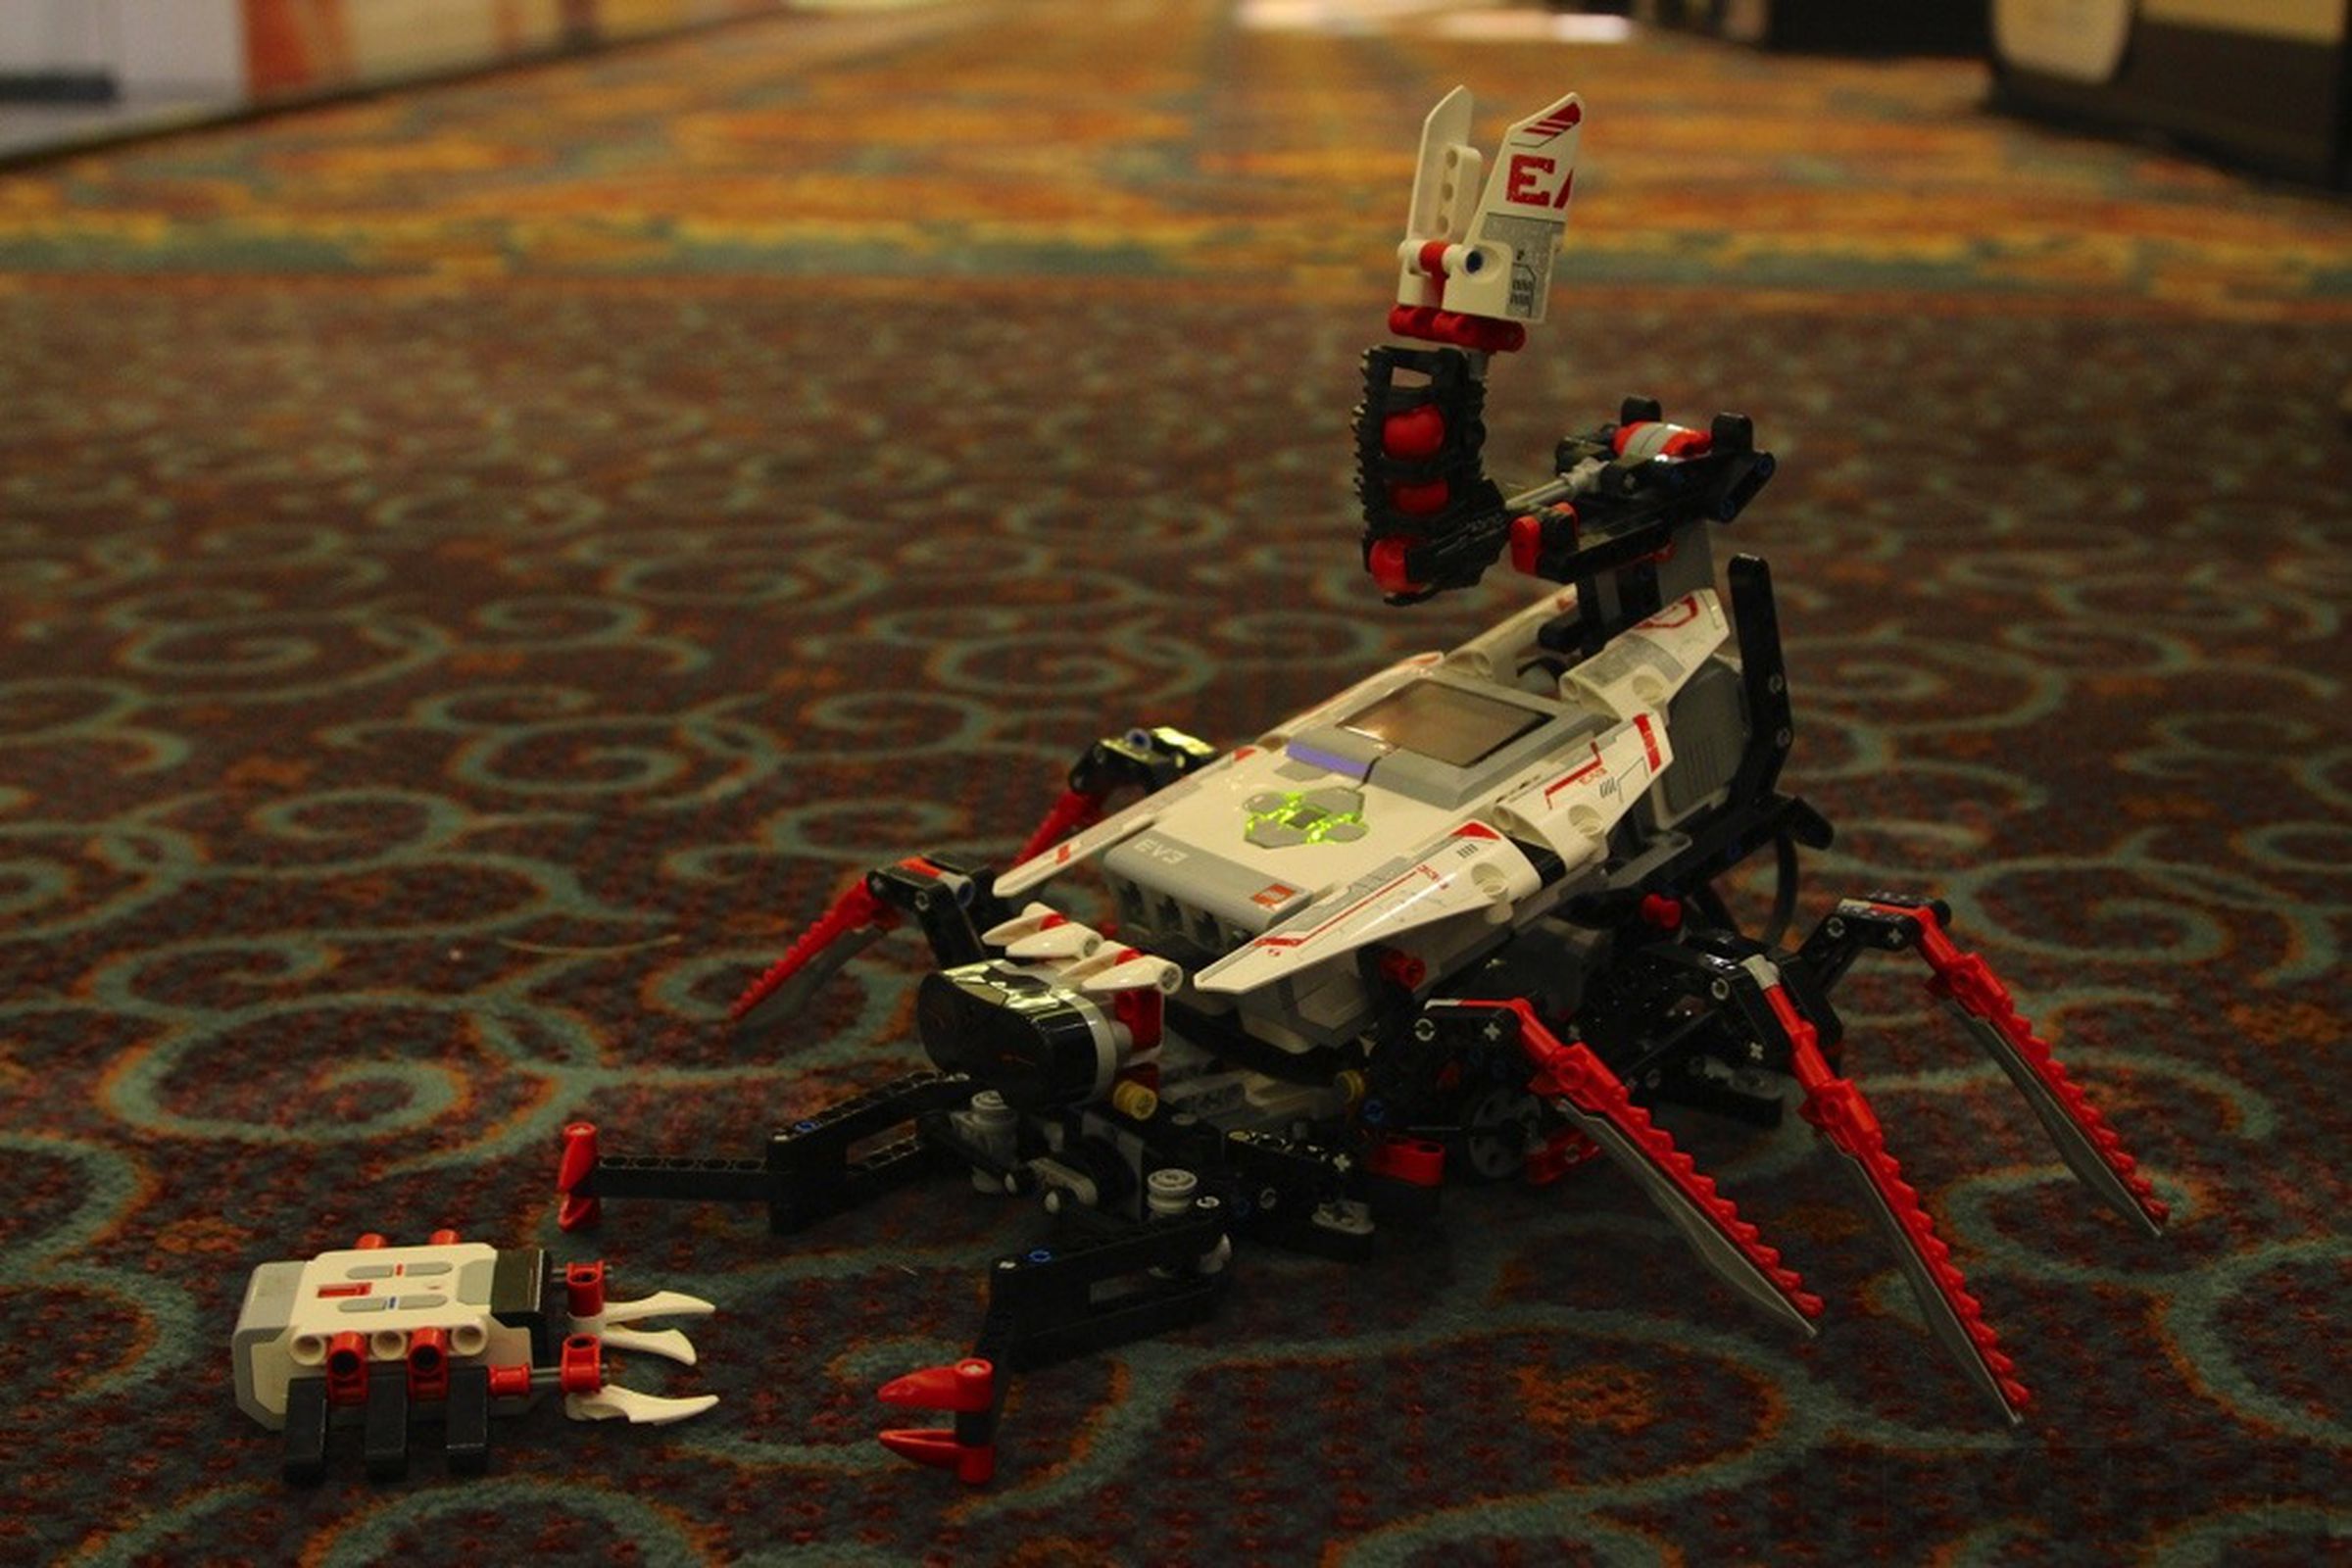 Gallery Photo: Lego Mindstorms EV3 pictures